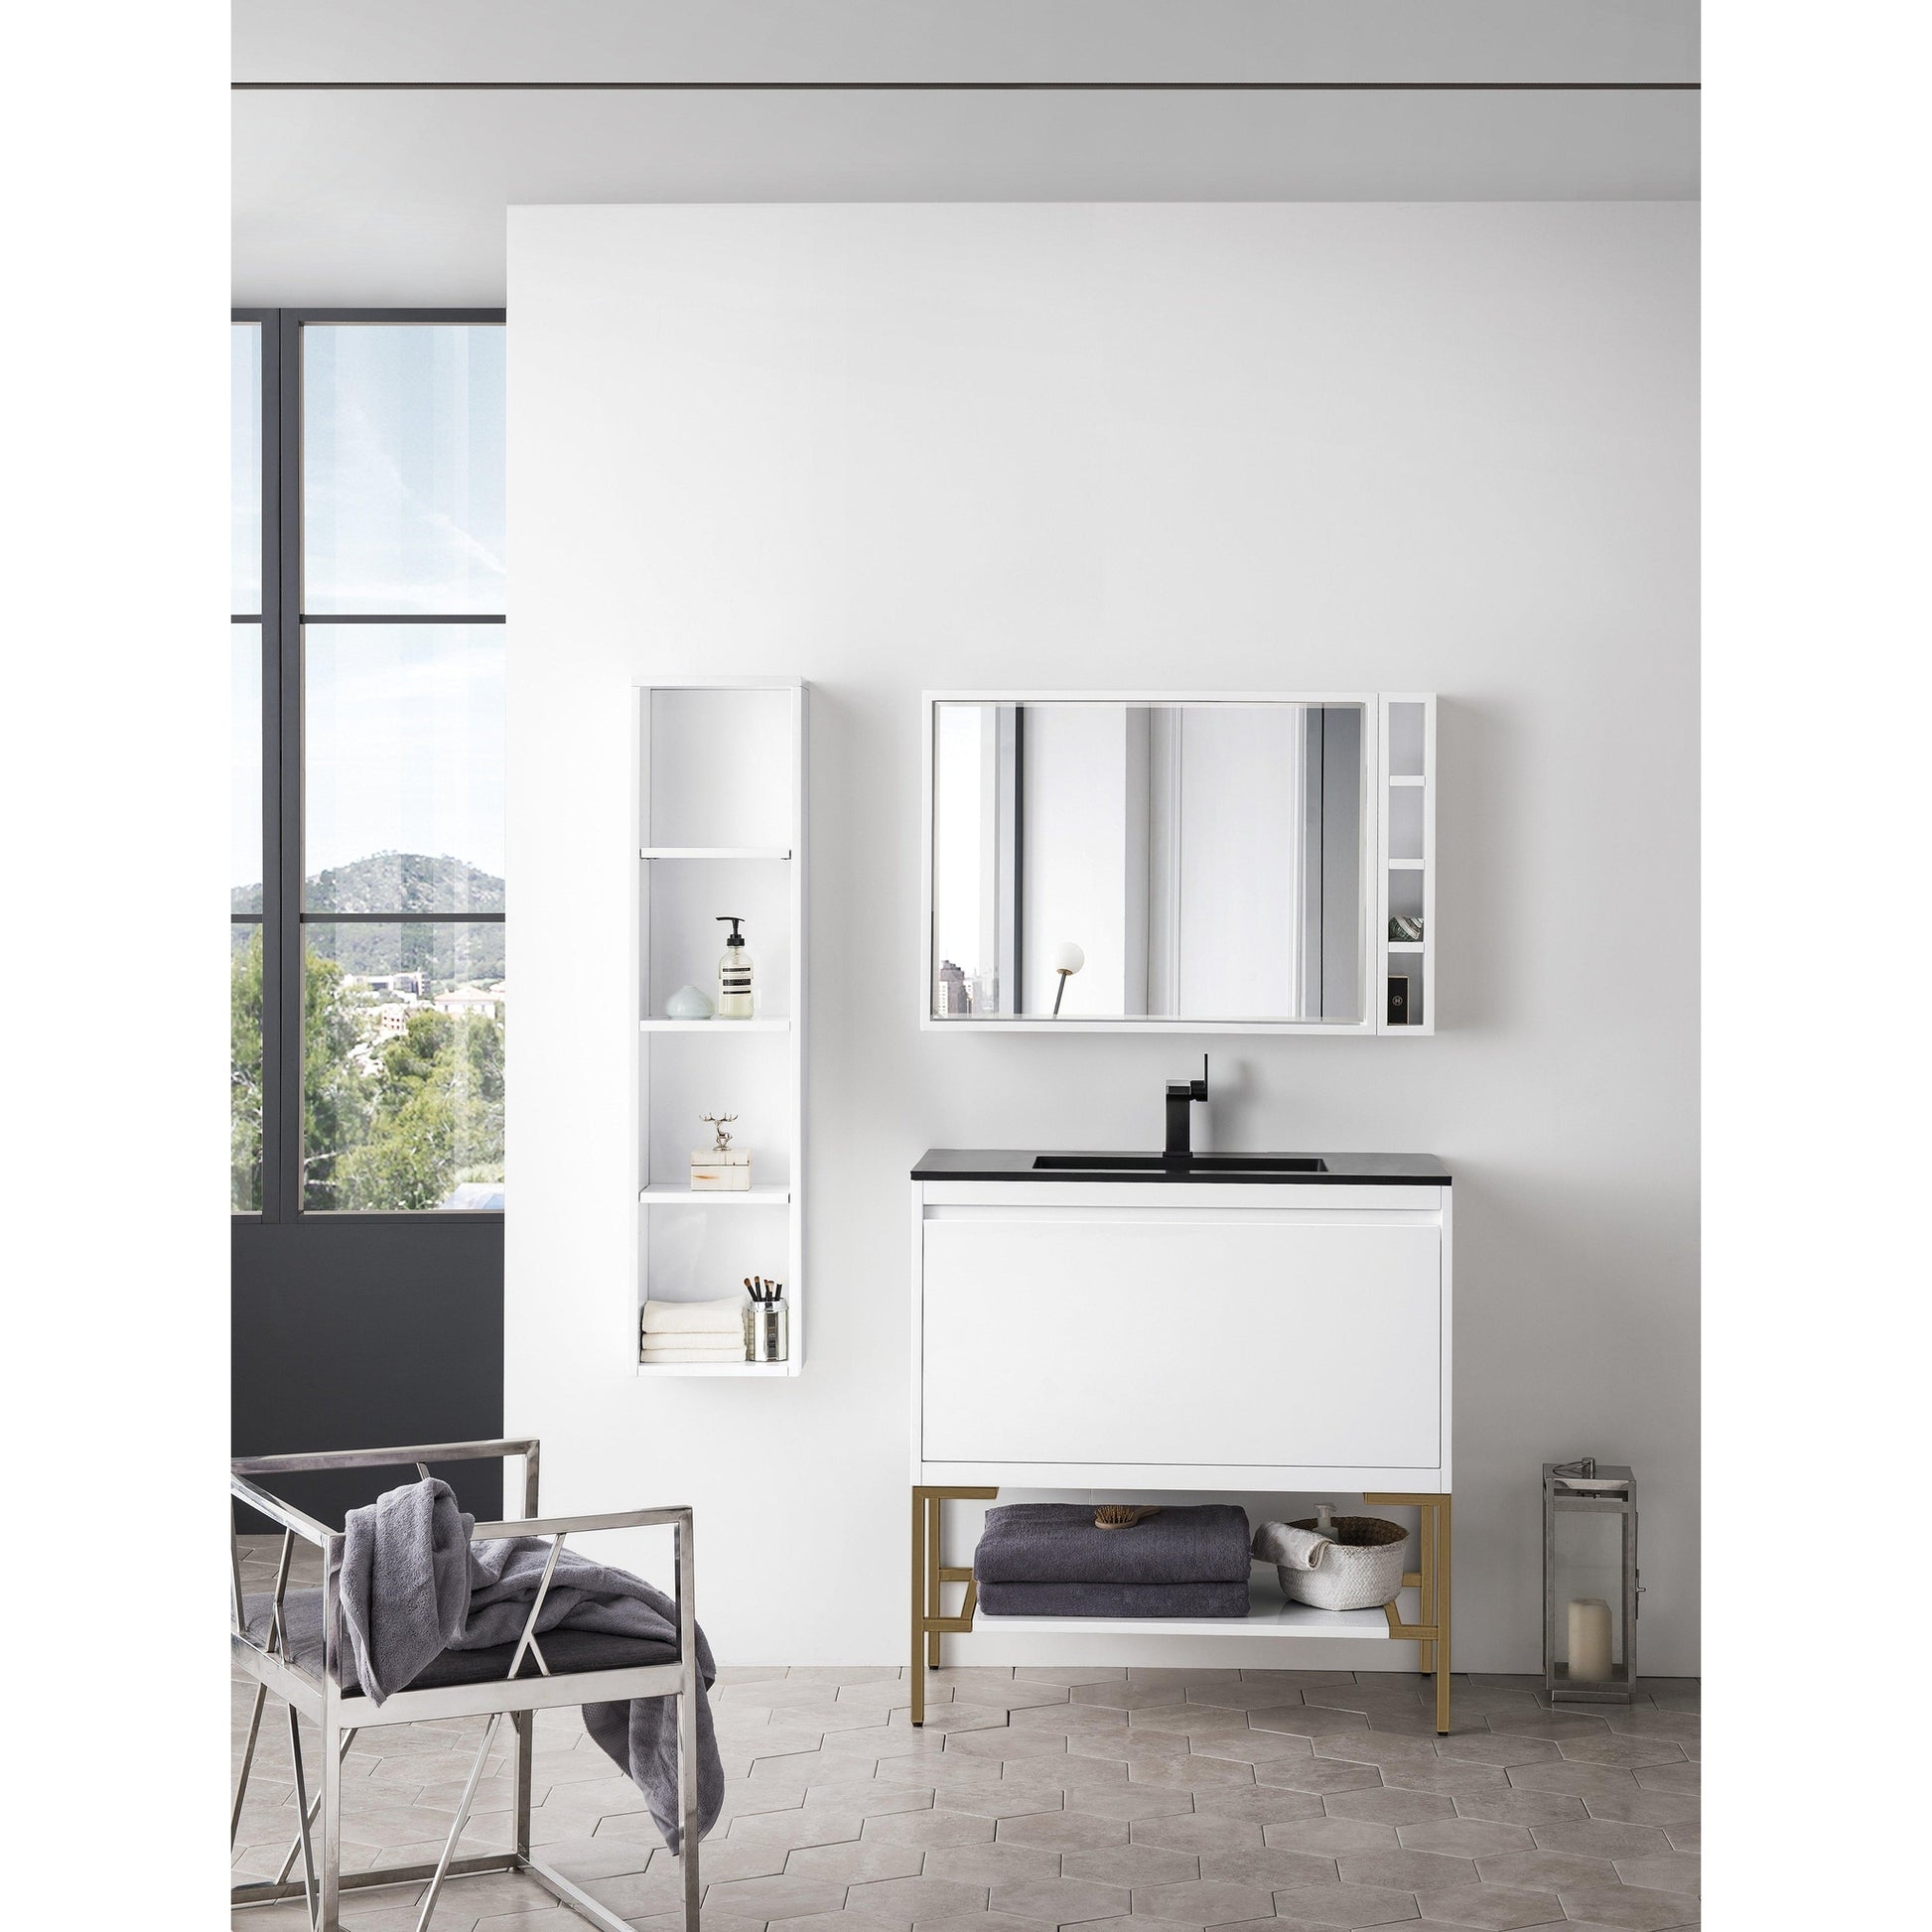 James Martin Vanities Milan 35.4" Glossy White, Radiant Gold Single Vanity Cabinet With Charcoal Black Composite Top